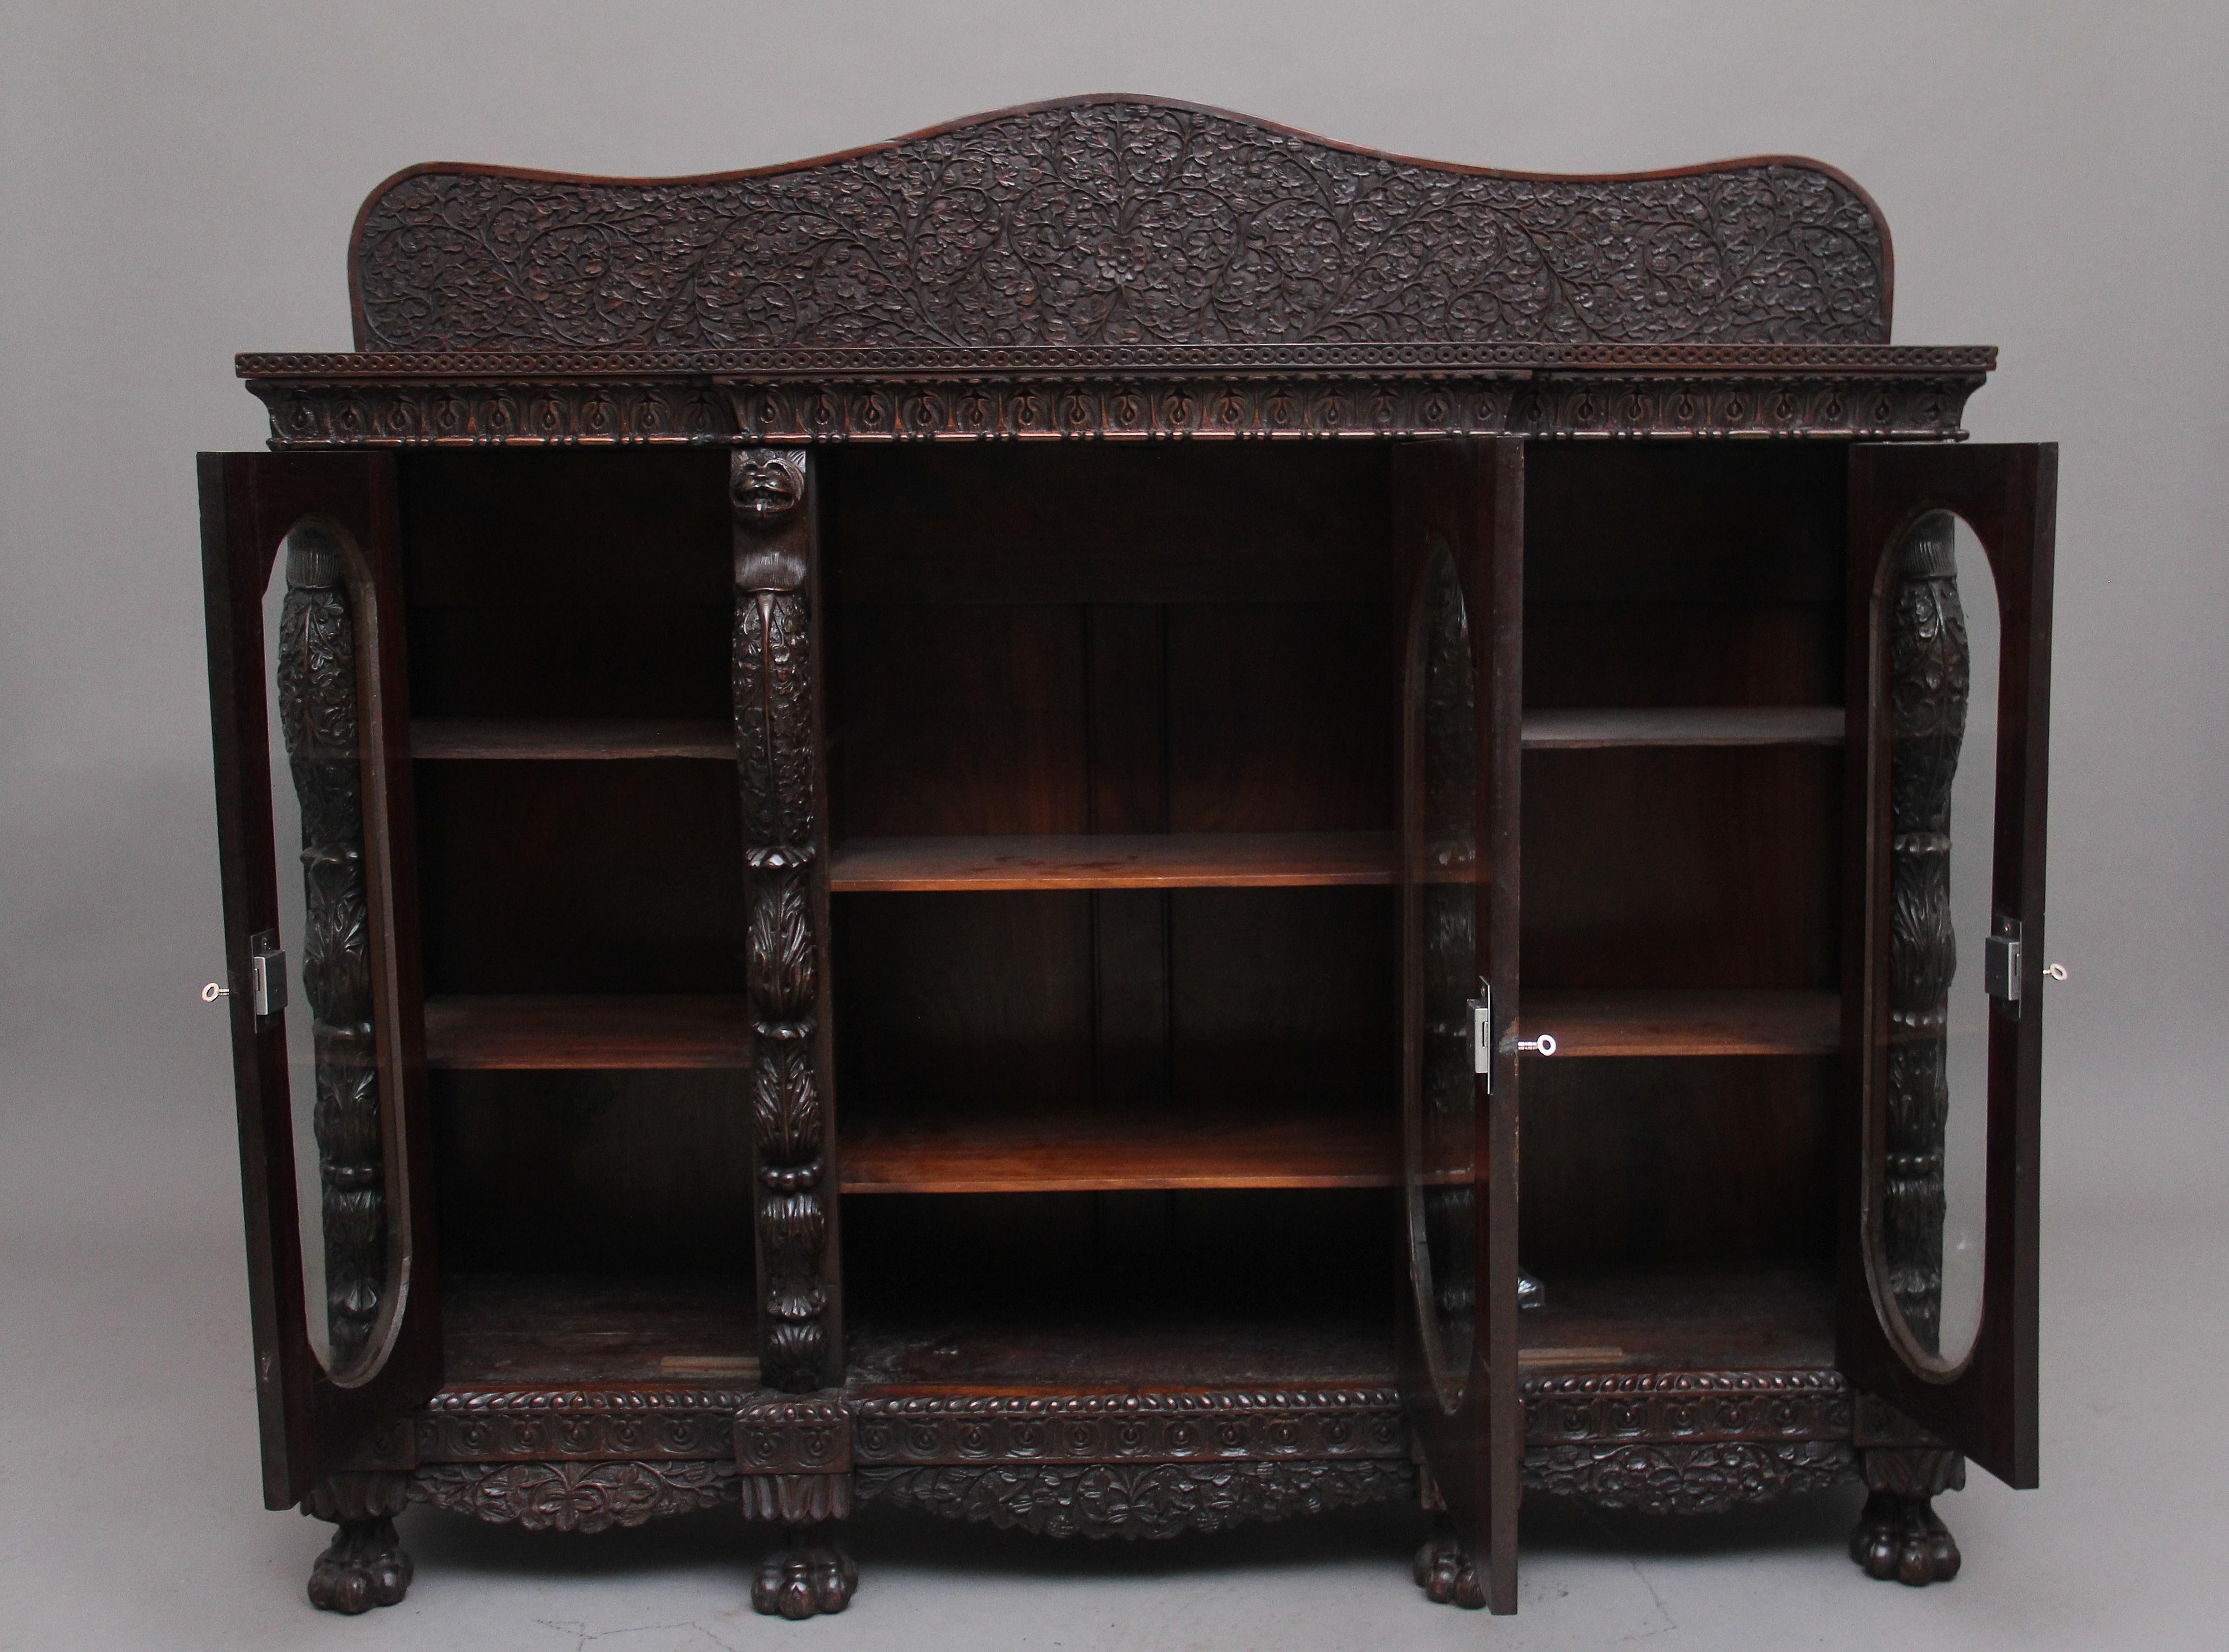 A fabulous quality 19th century Burmese carved breakfront three door cabinet, profusely carved all over with pierced and carved flowers, foliage and vines, having a nice figured top with a shaped back carved and pierced with further foliage and